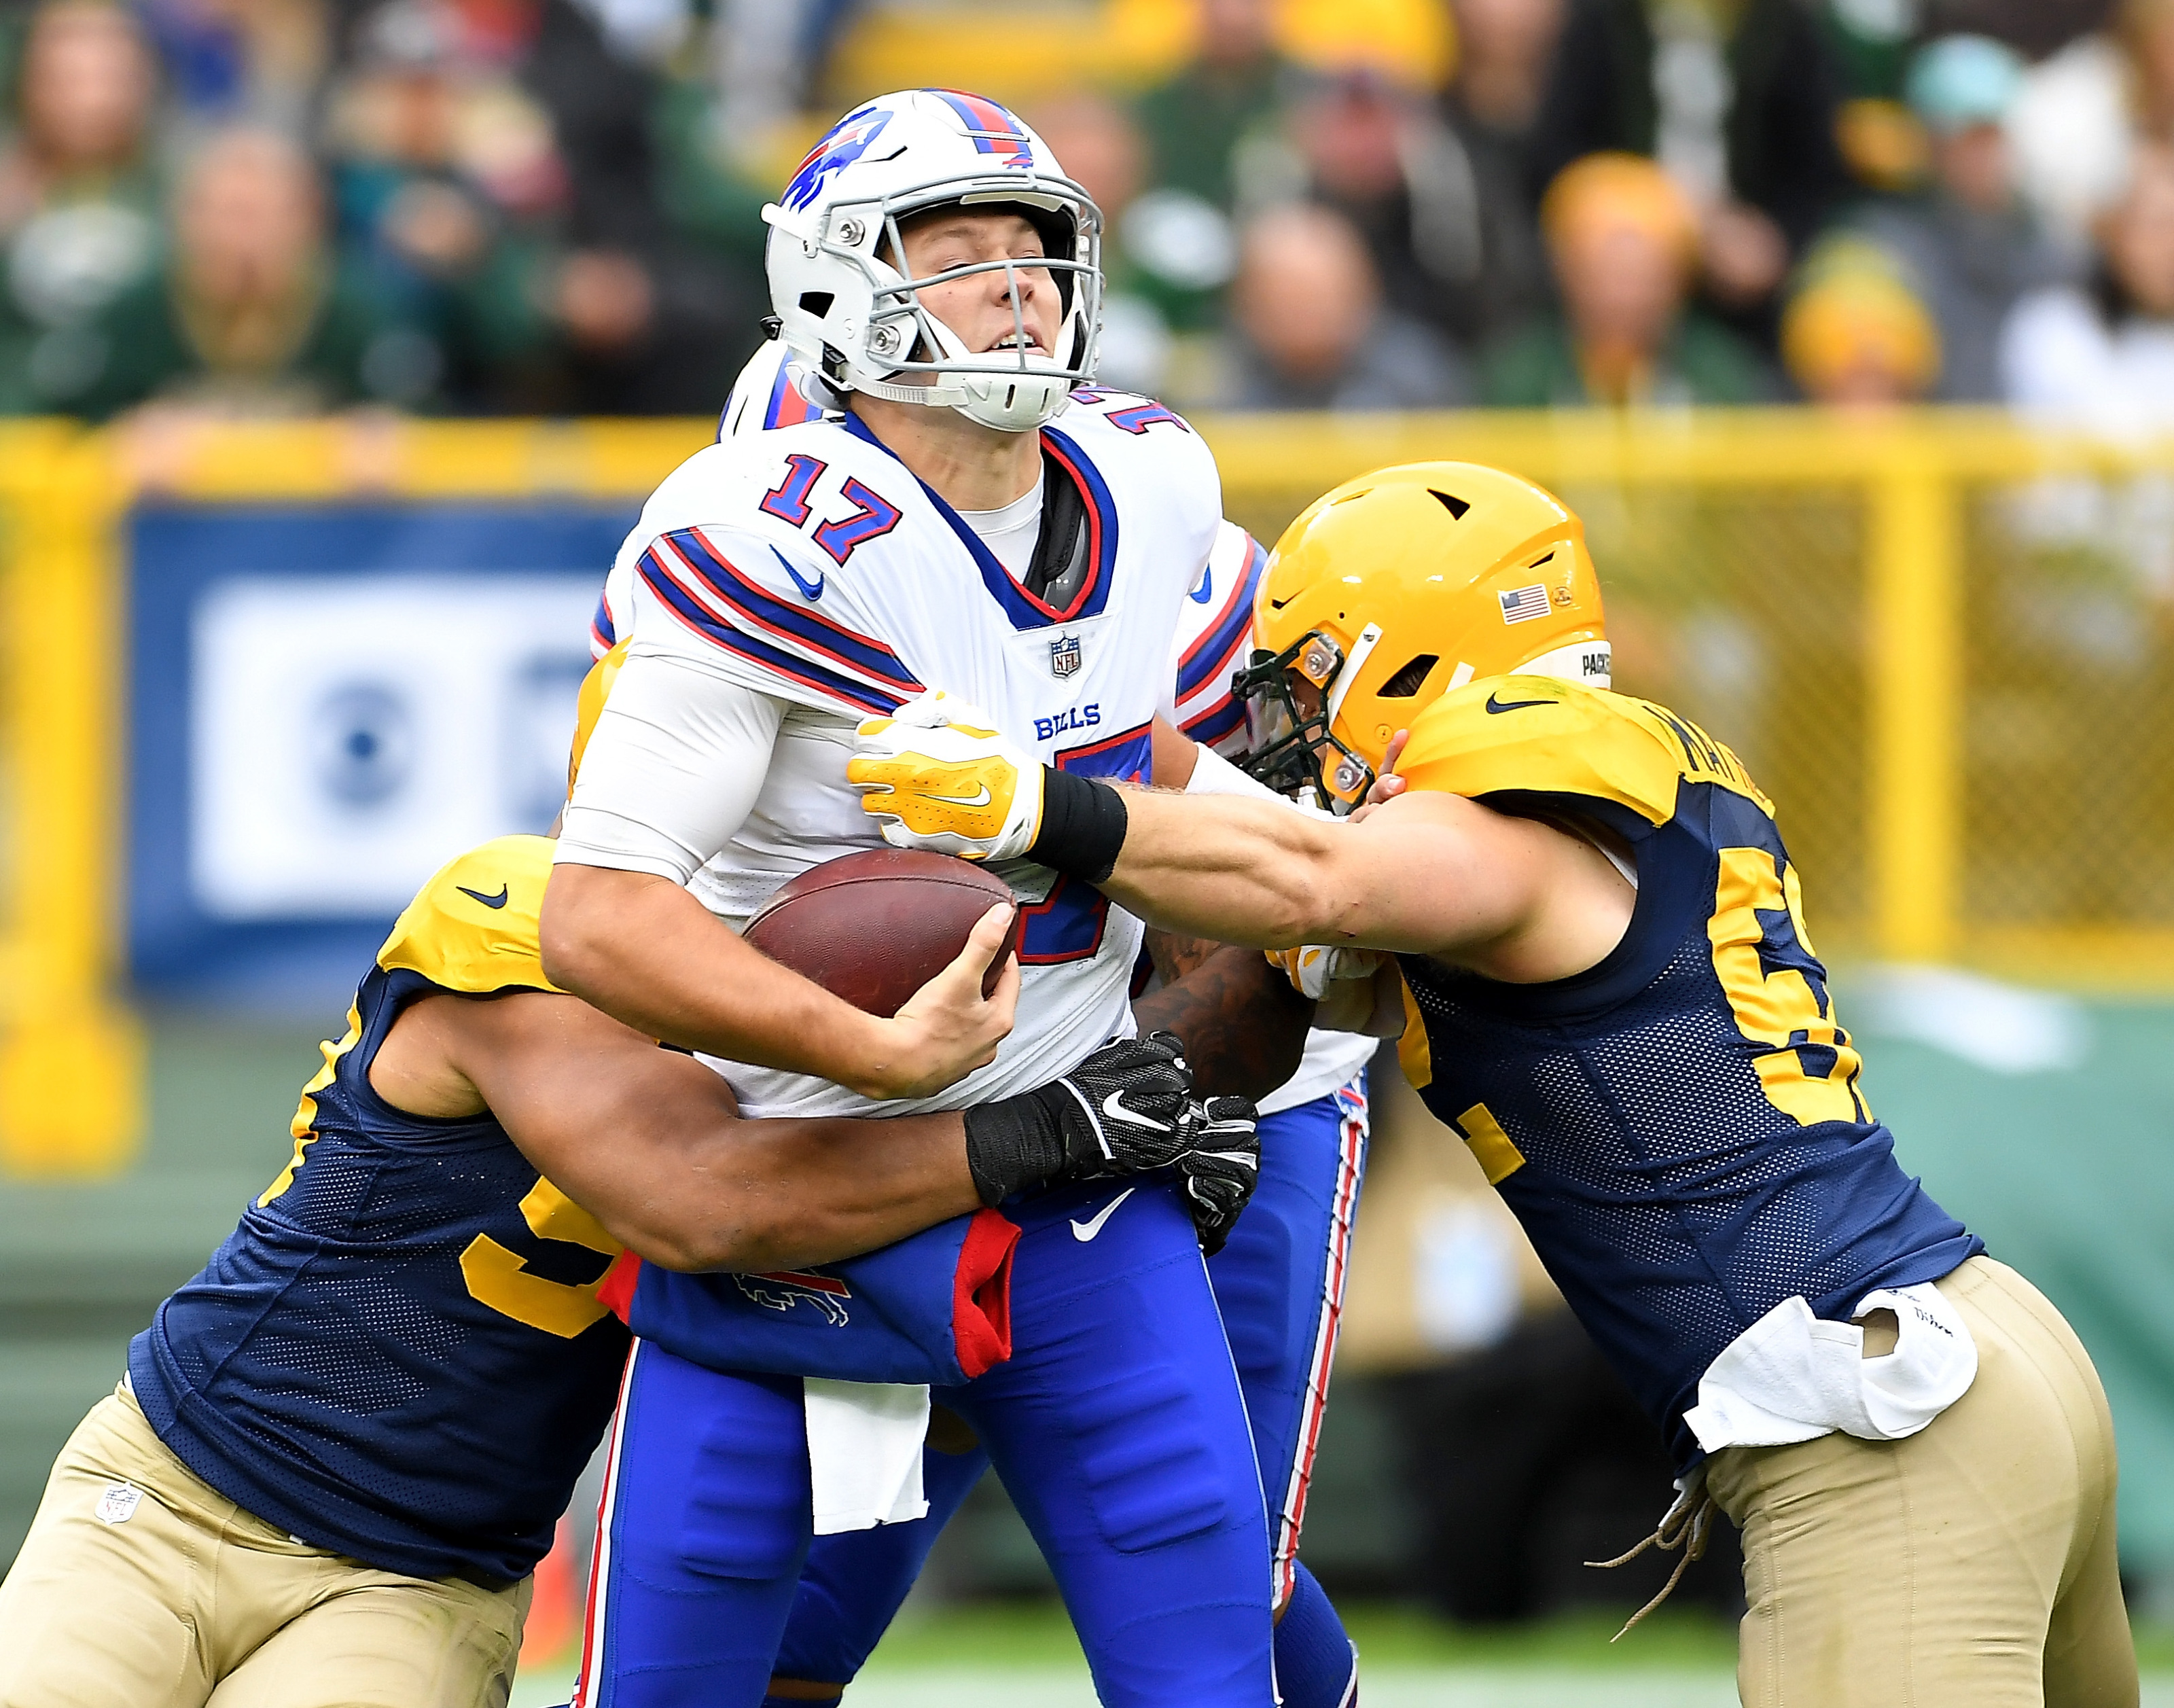 Green Bay Packers defense shines while offense falls flat against